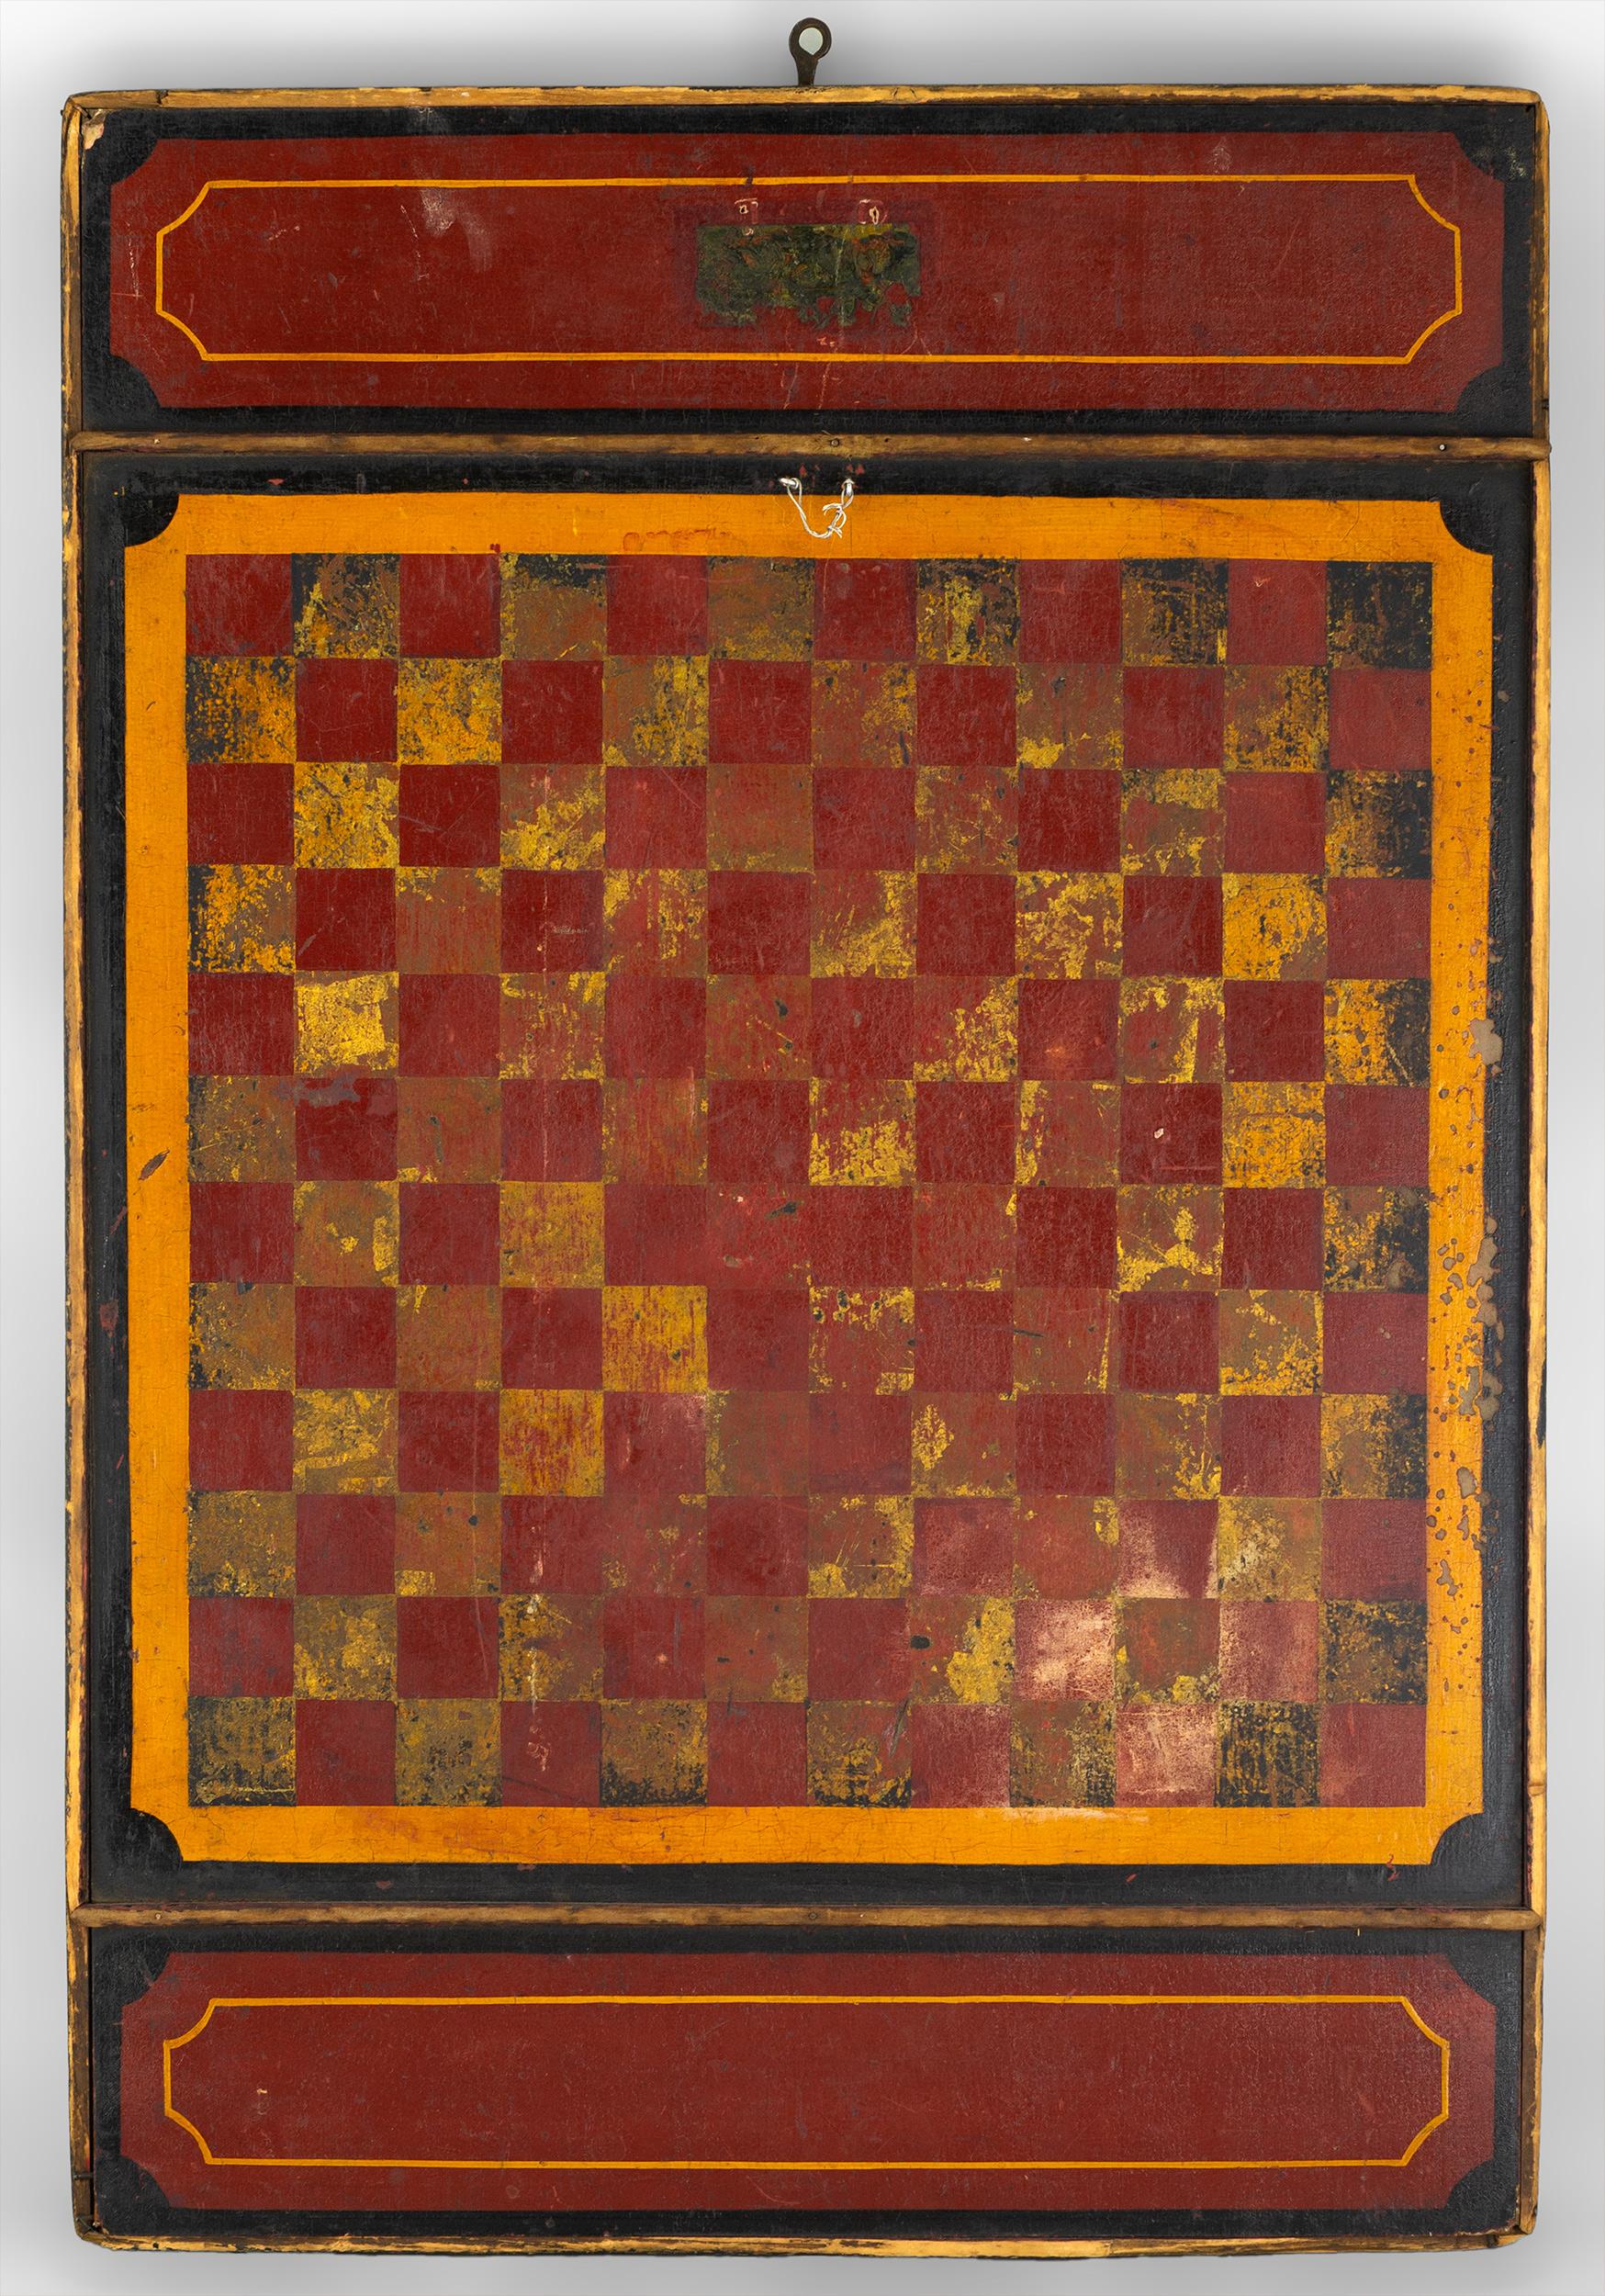 Polychrome double sided game board with
applied molding. The Parcheesi side is painted
with green, red, yellow, blue and purple with
leaf and floral decoration. The opposing side is
a checker board with a red and gold playing surface
American,